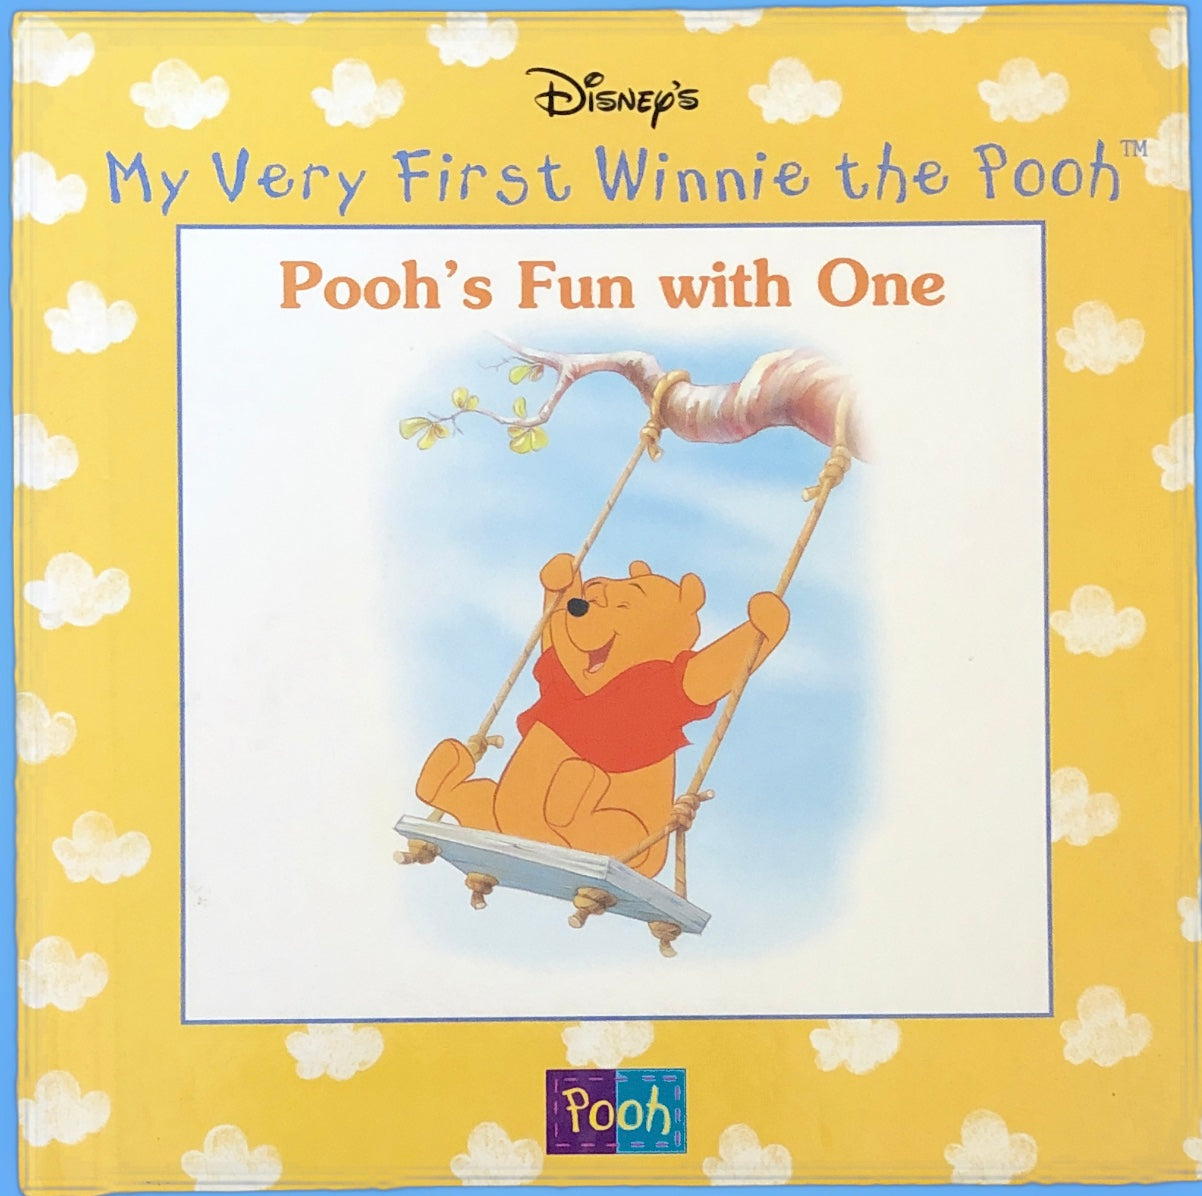 My Very First Winnie the Pooh: Pooh's Fun with One